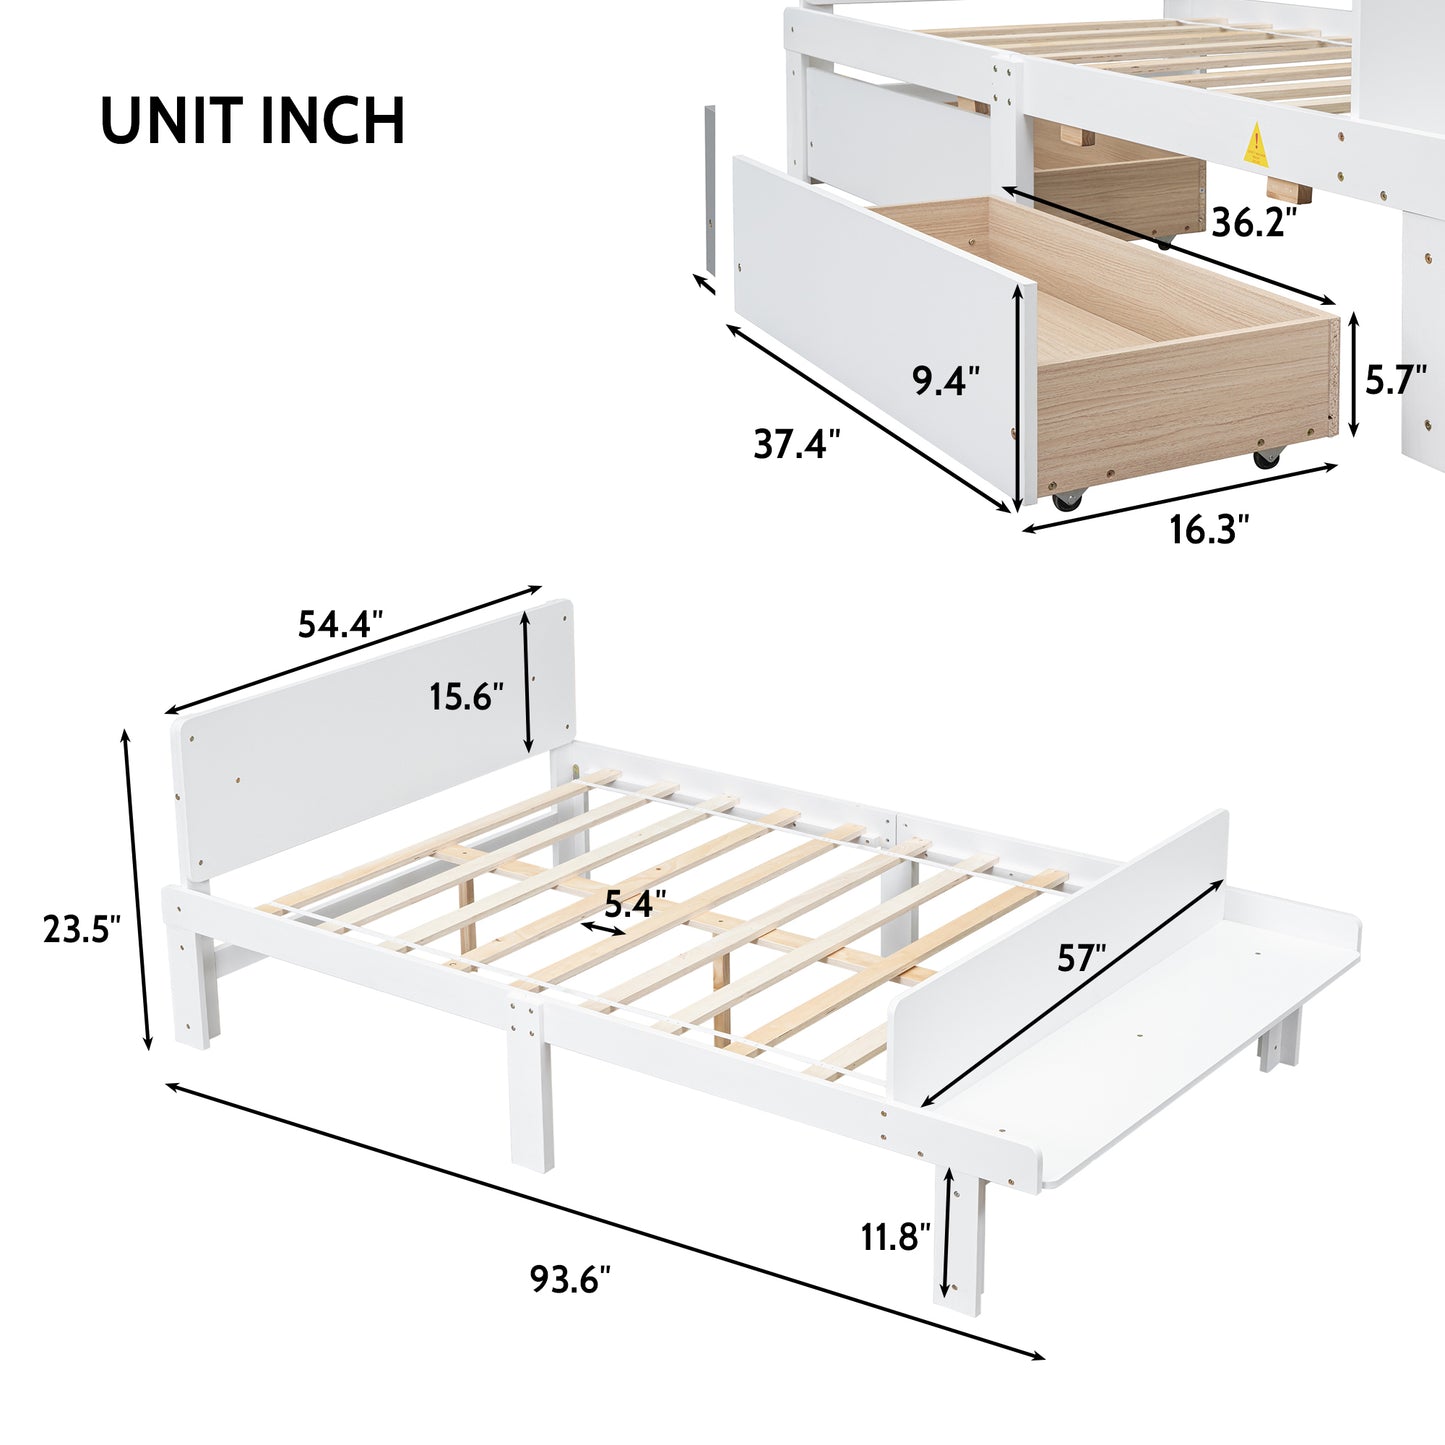 Full Platform Bed with Footboard Bench,2 drawers,White